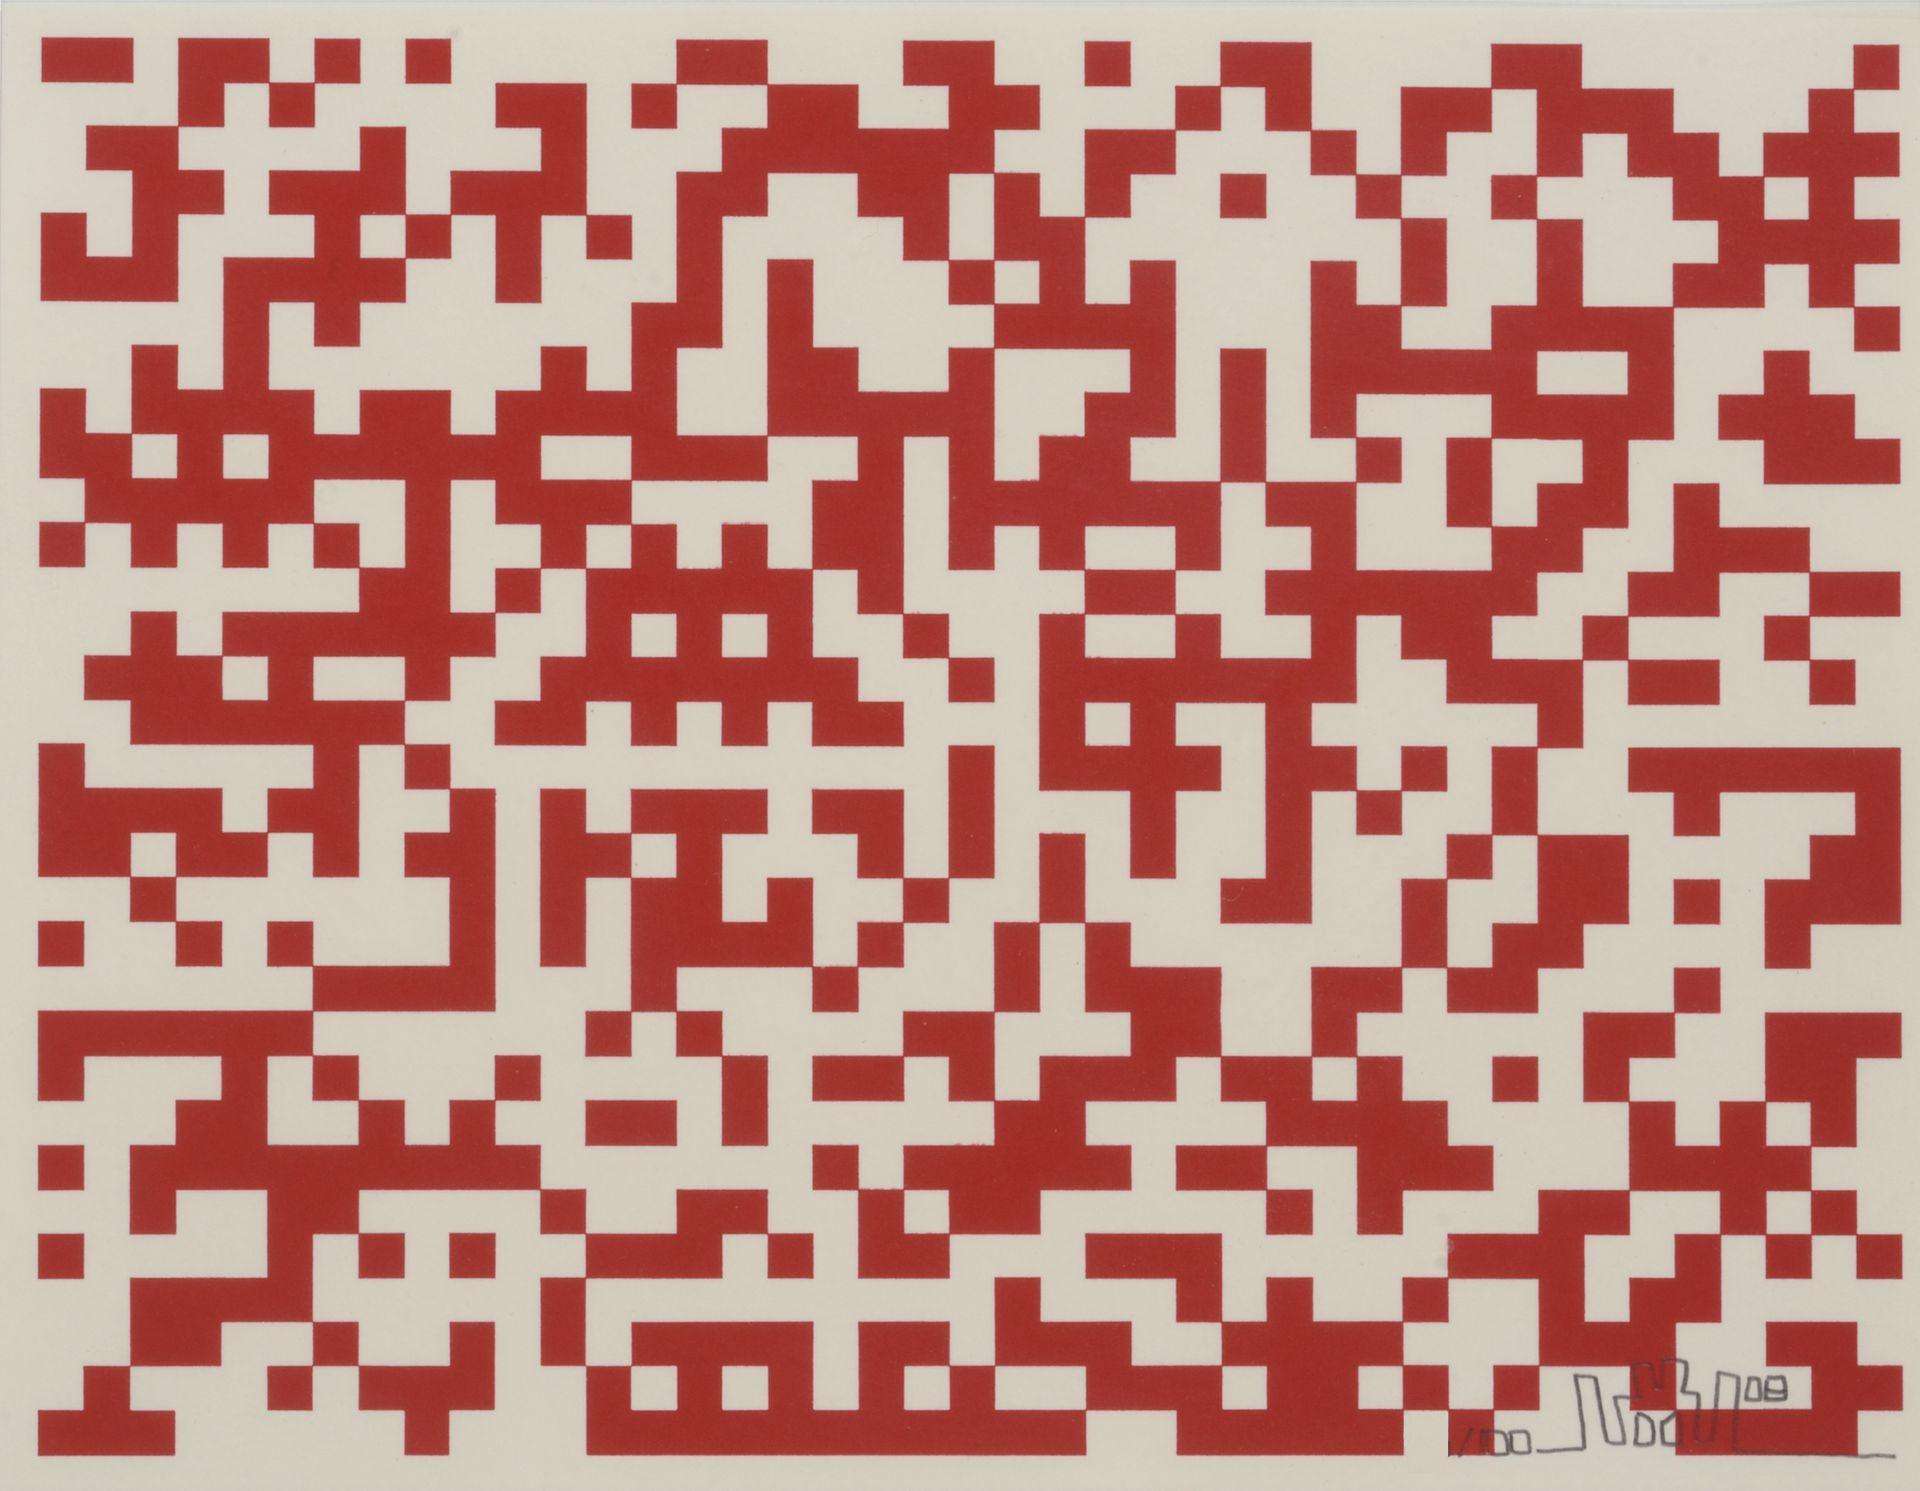 The print depicts a red and white maze-like pattern.The print has a strong technological feel to it as it resonates with a bar code or the 8-bit visual register of arcade games. It is hard to discern exactly what is being depicted in the print, however when looked at closely it is apparent that some of Invader’s famous alien characters are lurking amongst the chaotic composition of red squares.